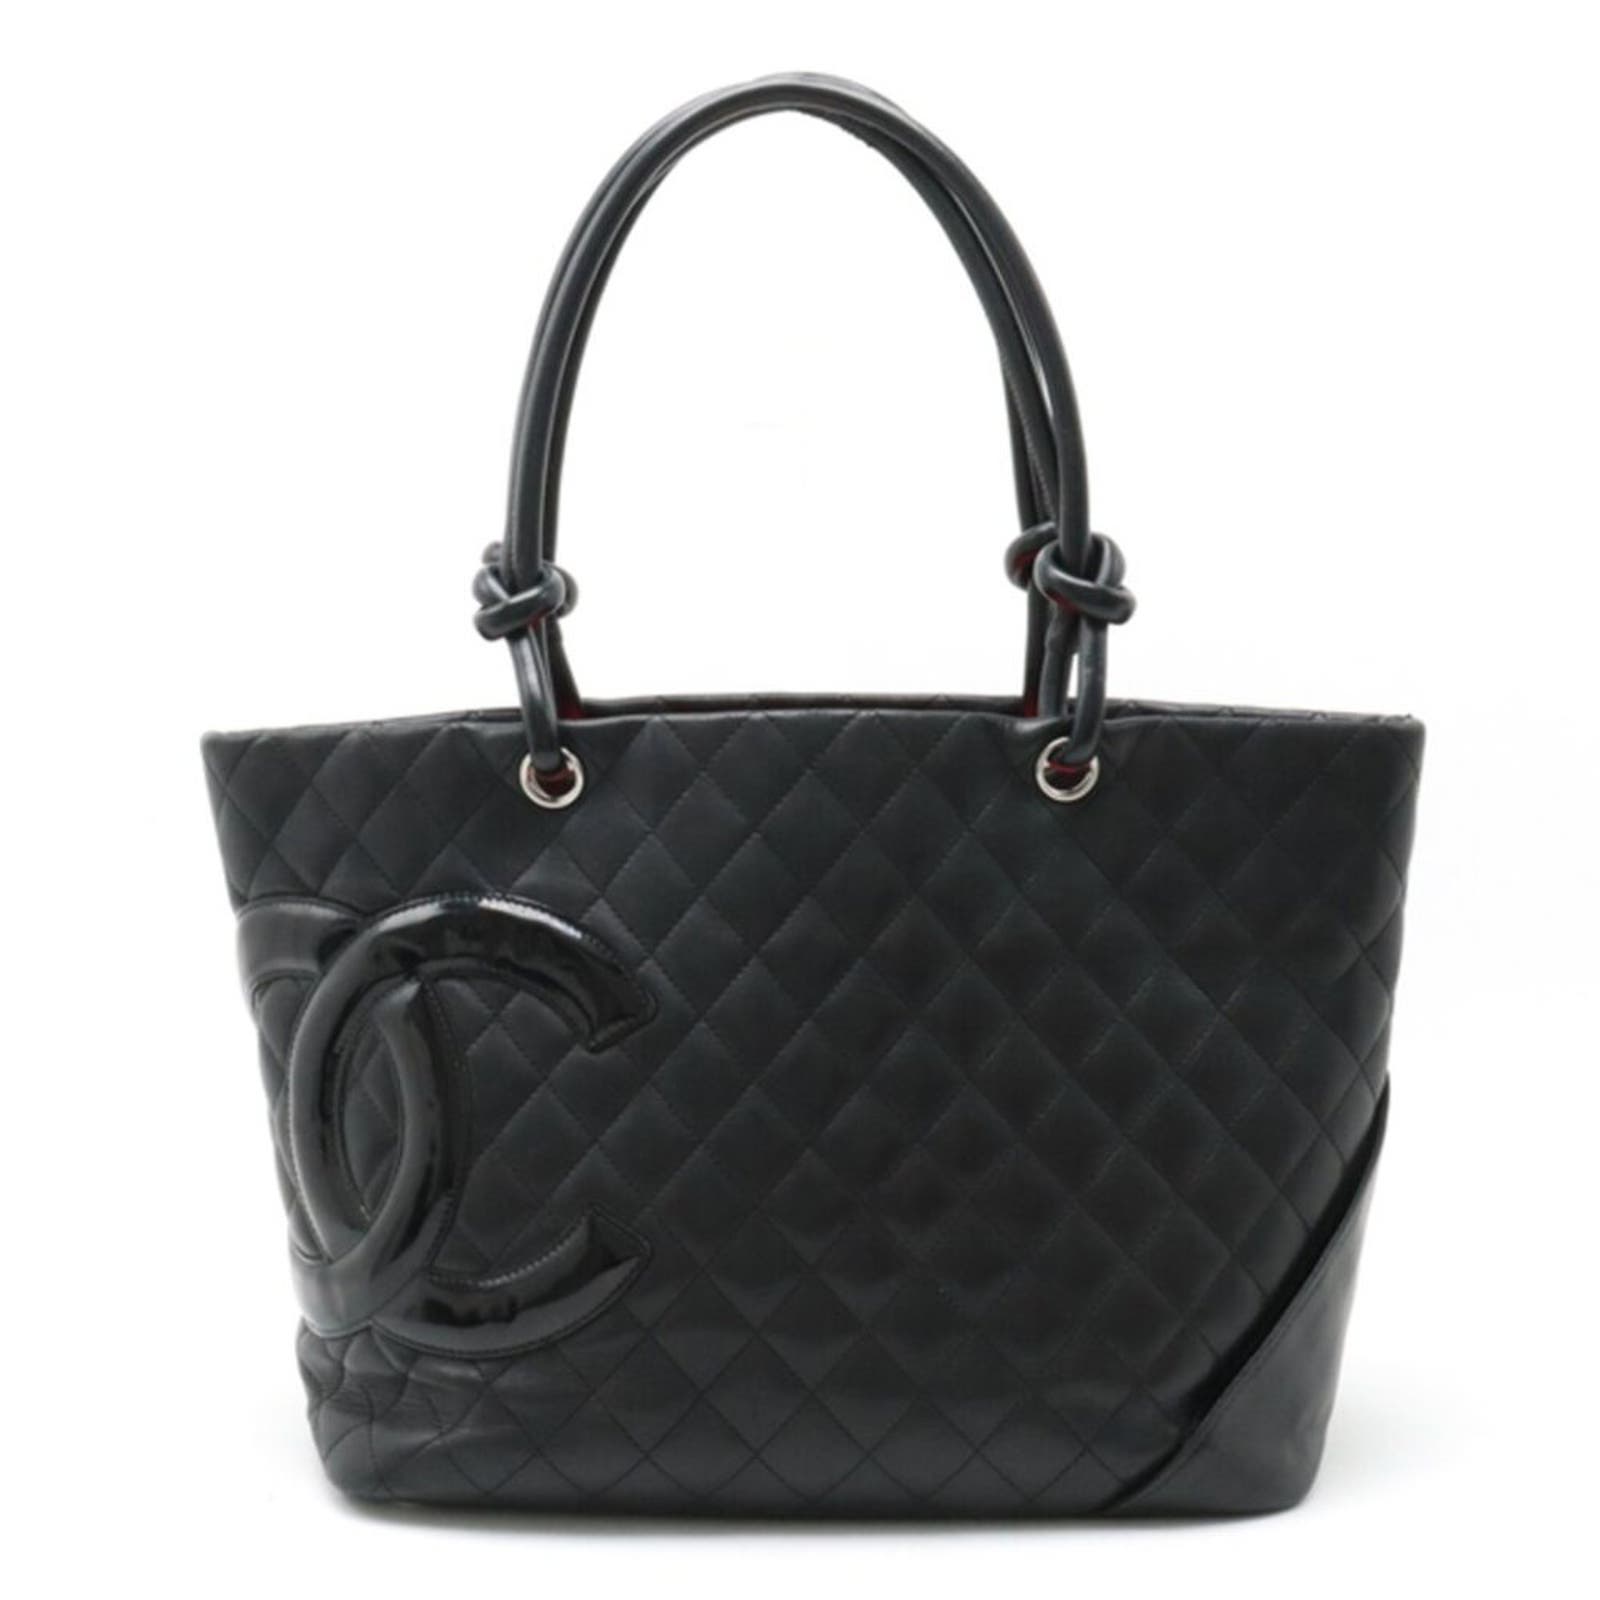 Authentic CHANEL Cambon Ligne Quilted Calfskin Tote Bucket Bag Black